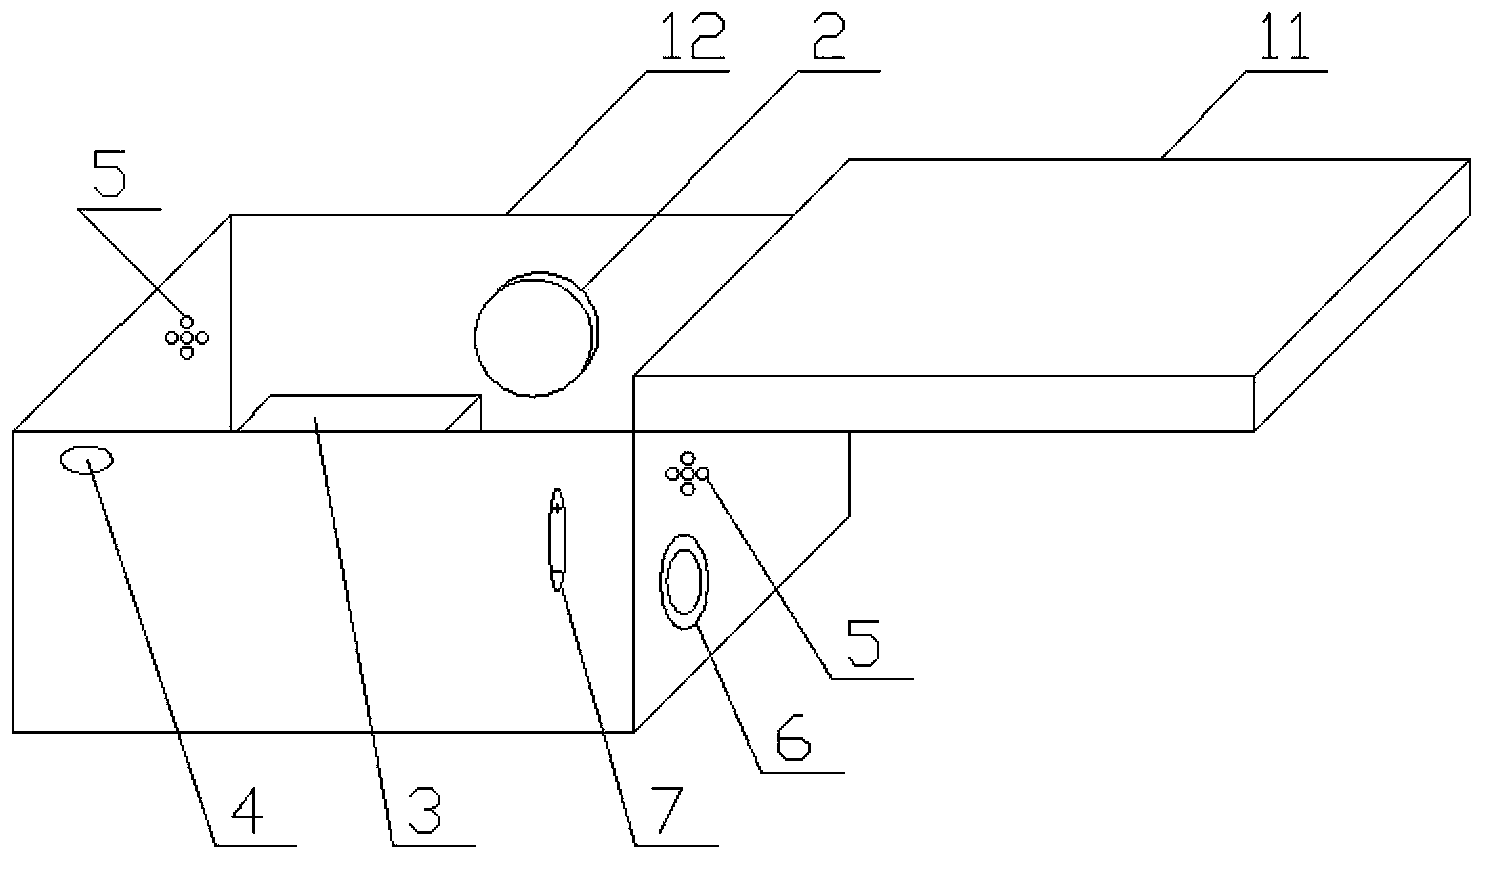 Projection device and method of using same